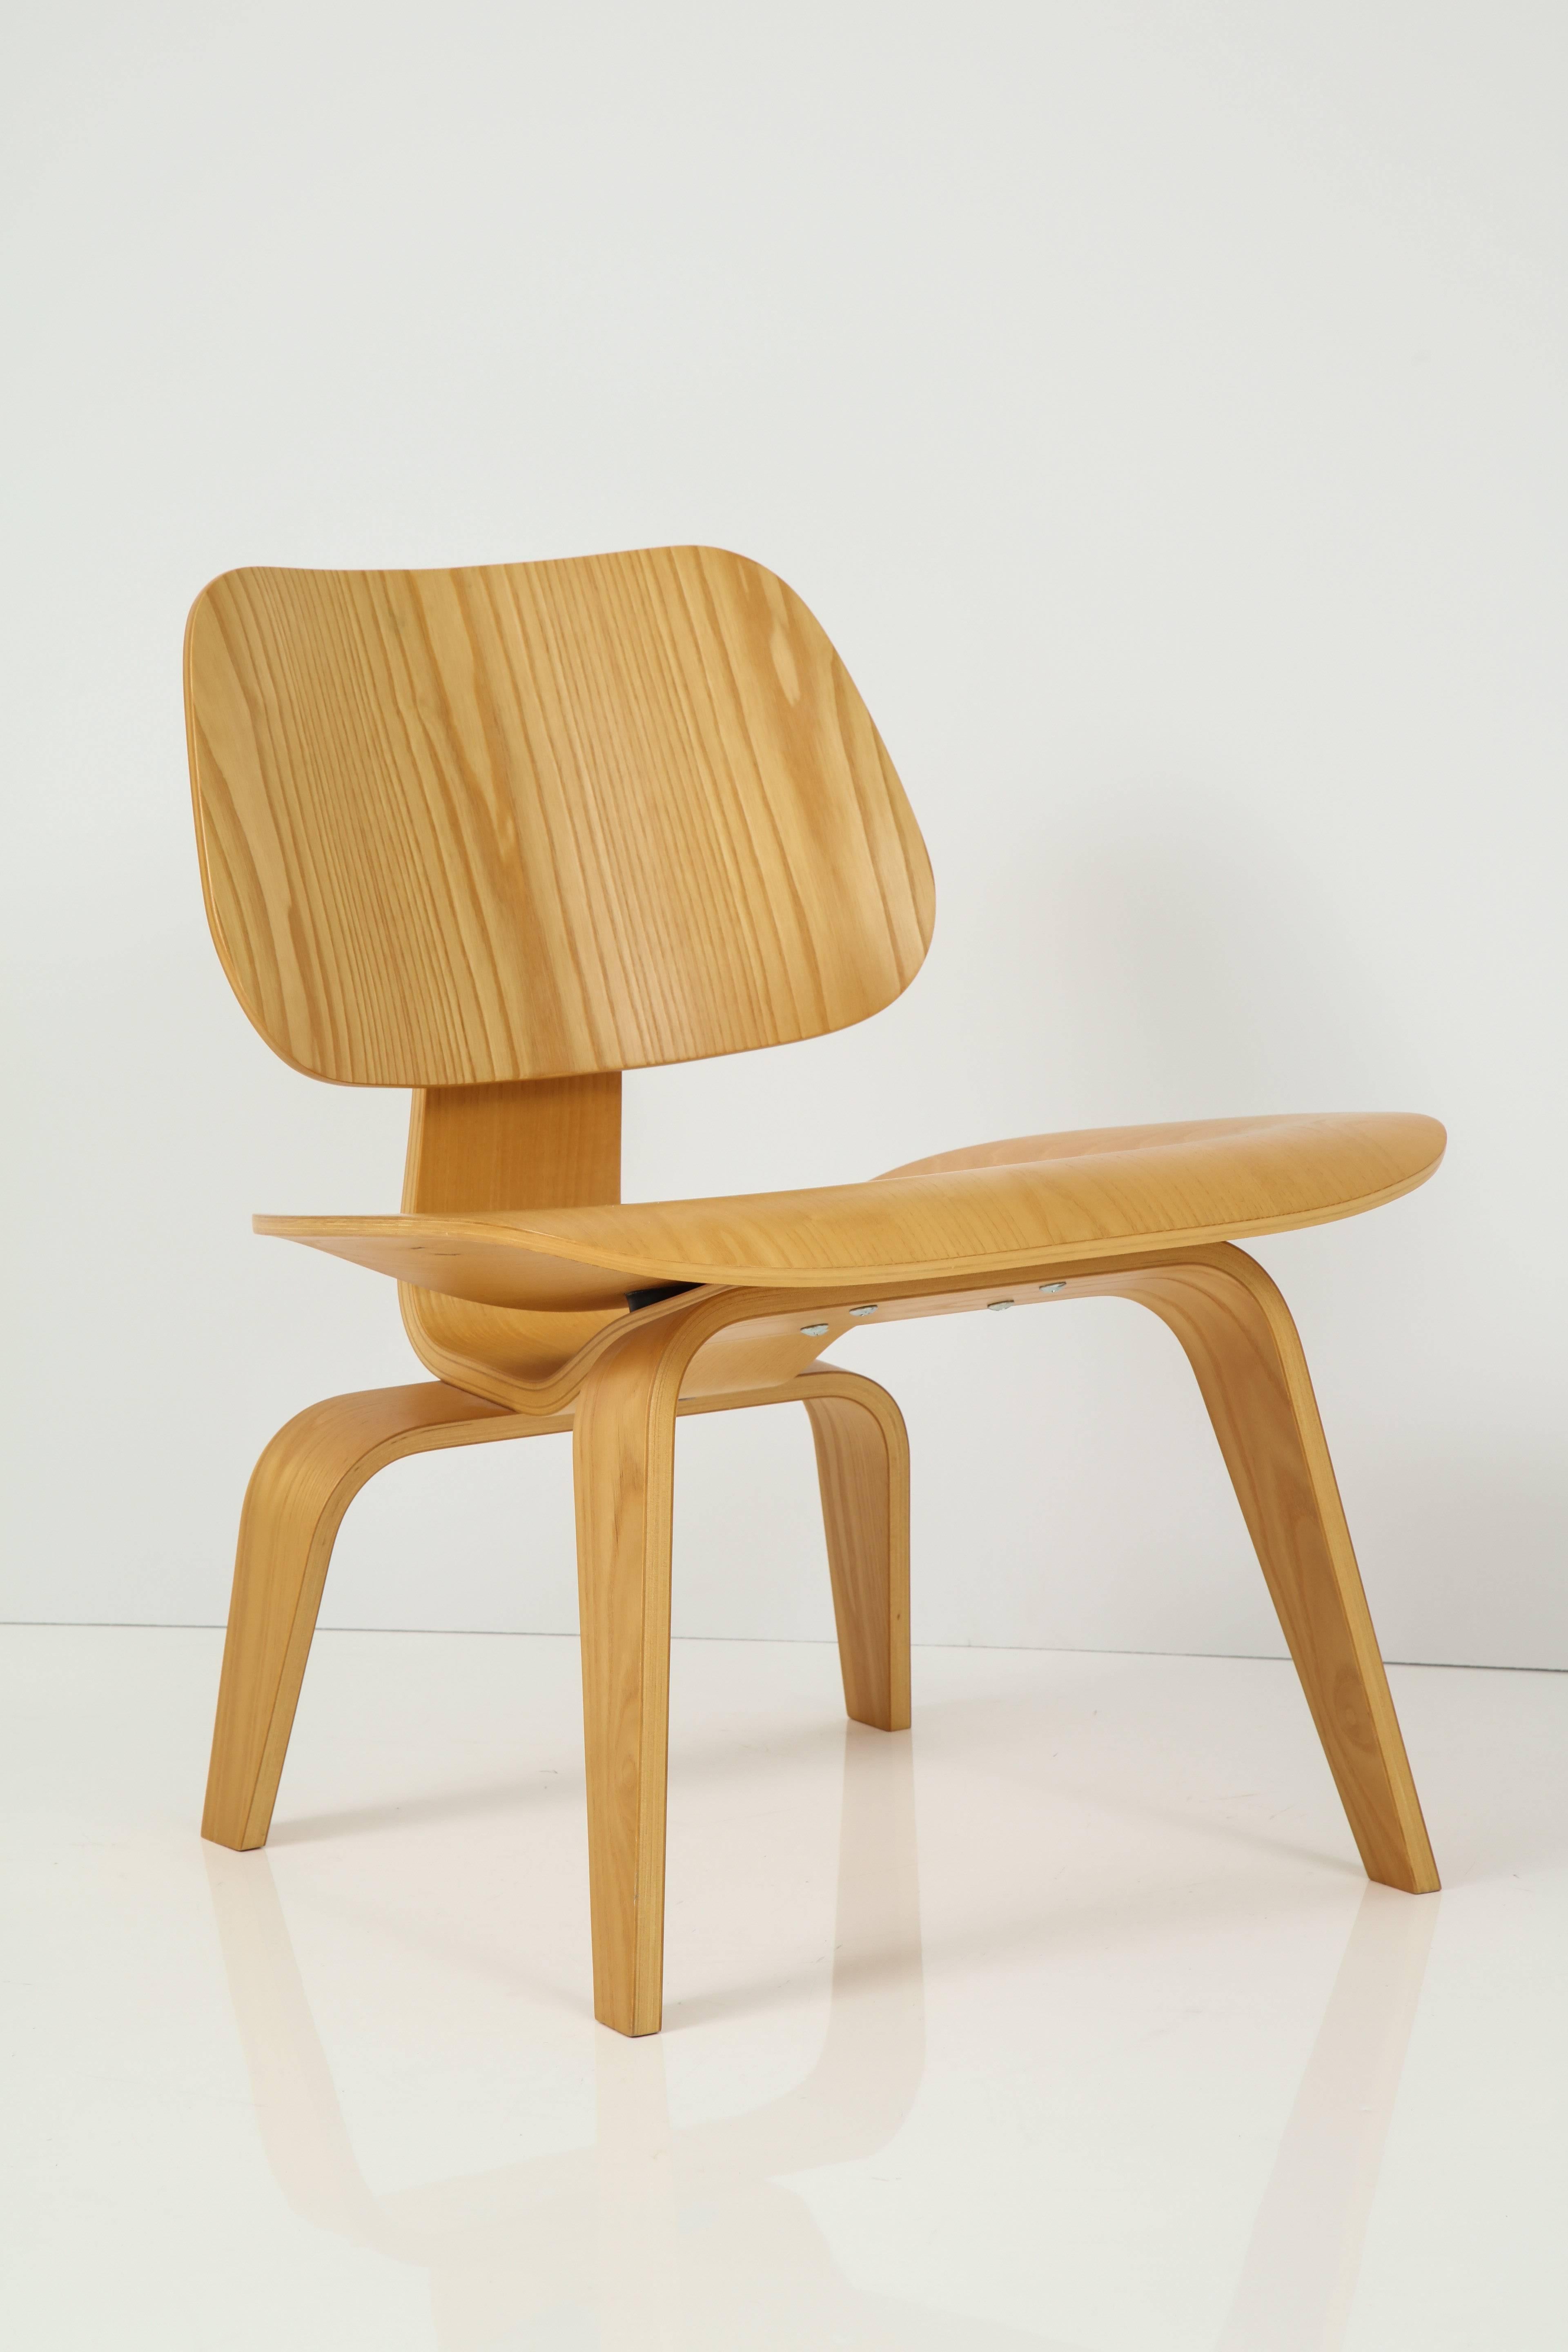 Ashwood, low chair wood a Classic design be Charles Eames for Herman Miller.